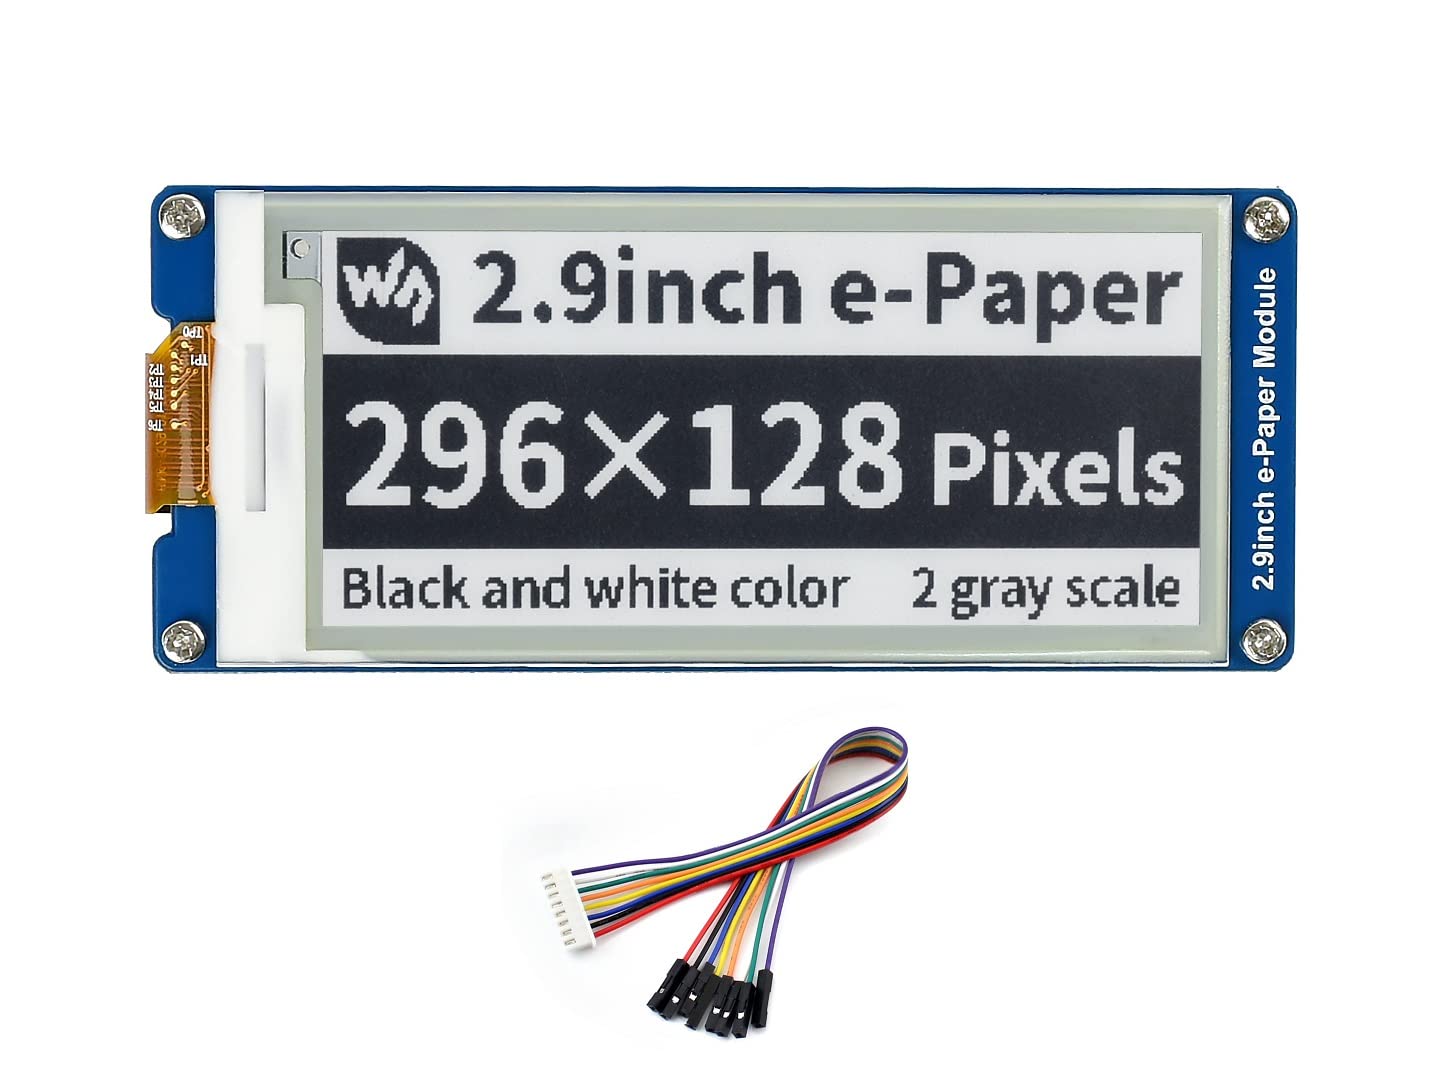 Mua  e-Paper Display Module, 296x128 Resolution /5V Two-Color epaper  Display E-Ink Screen Module SPI Interface Compatible with Raspberry  Pi/Arduino/Jetson Nano,Support Partial Refresh trên Amazon Mỹ chính hãng  2023 | Giaonhan247